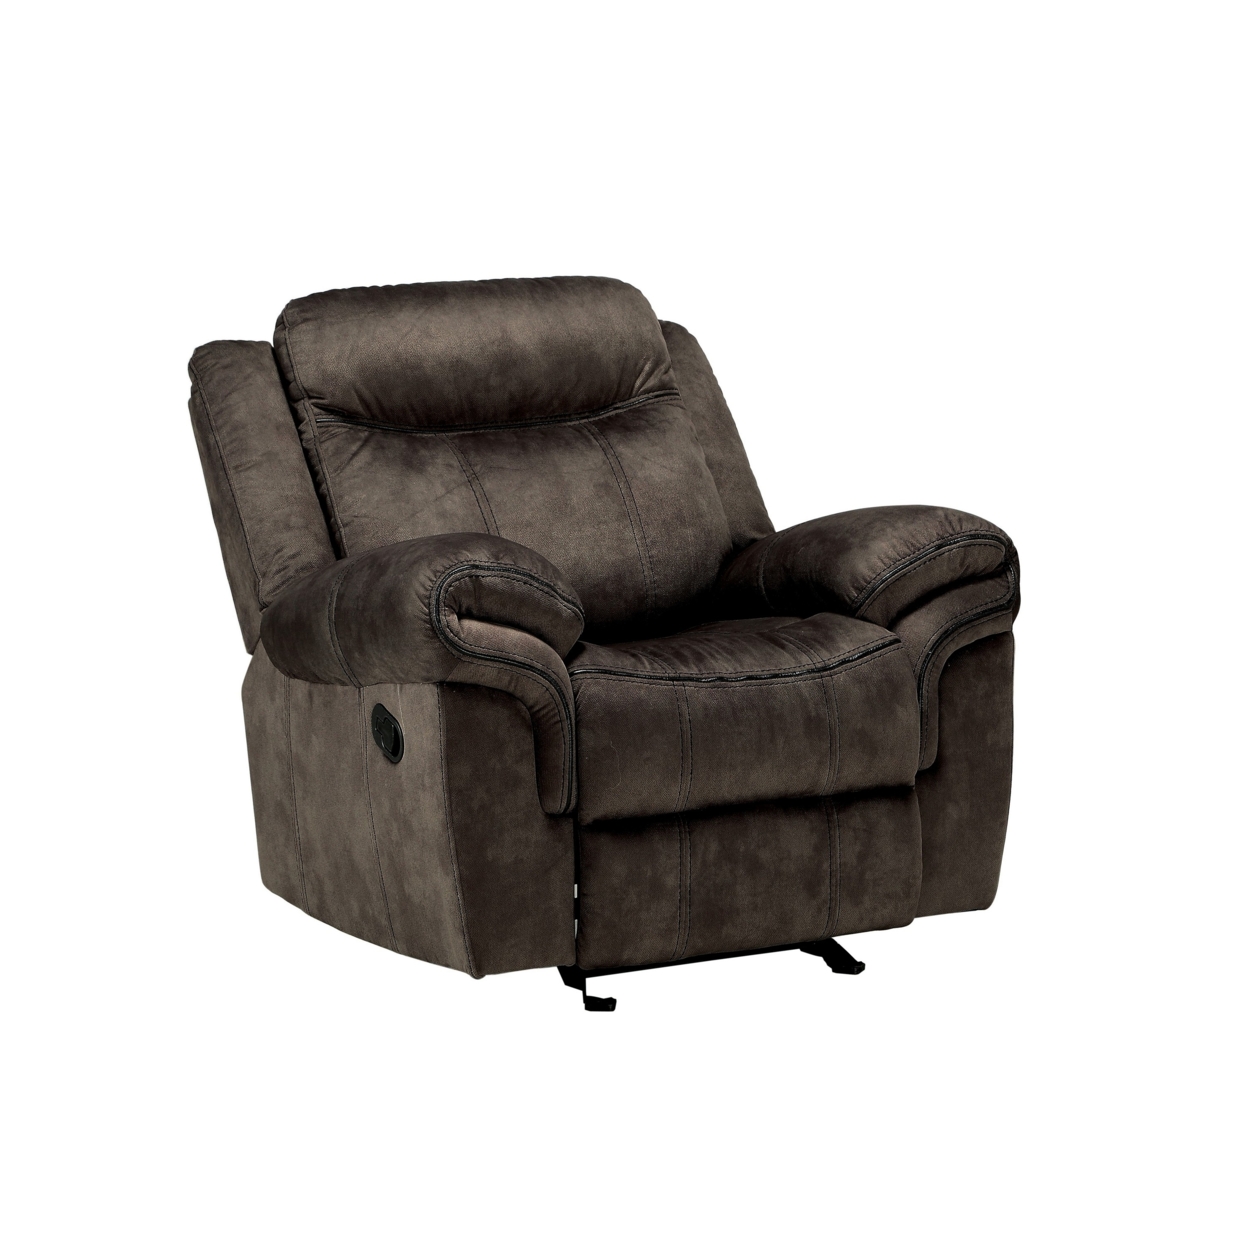 42 Inch Recliner Club Chair, Split Back, Pillow Top, Charcoal Gray Fabric